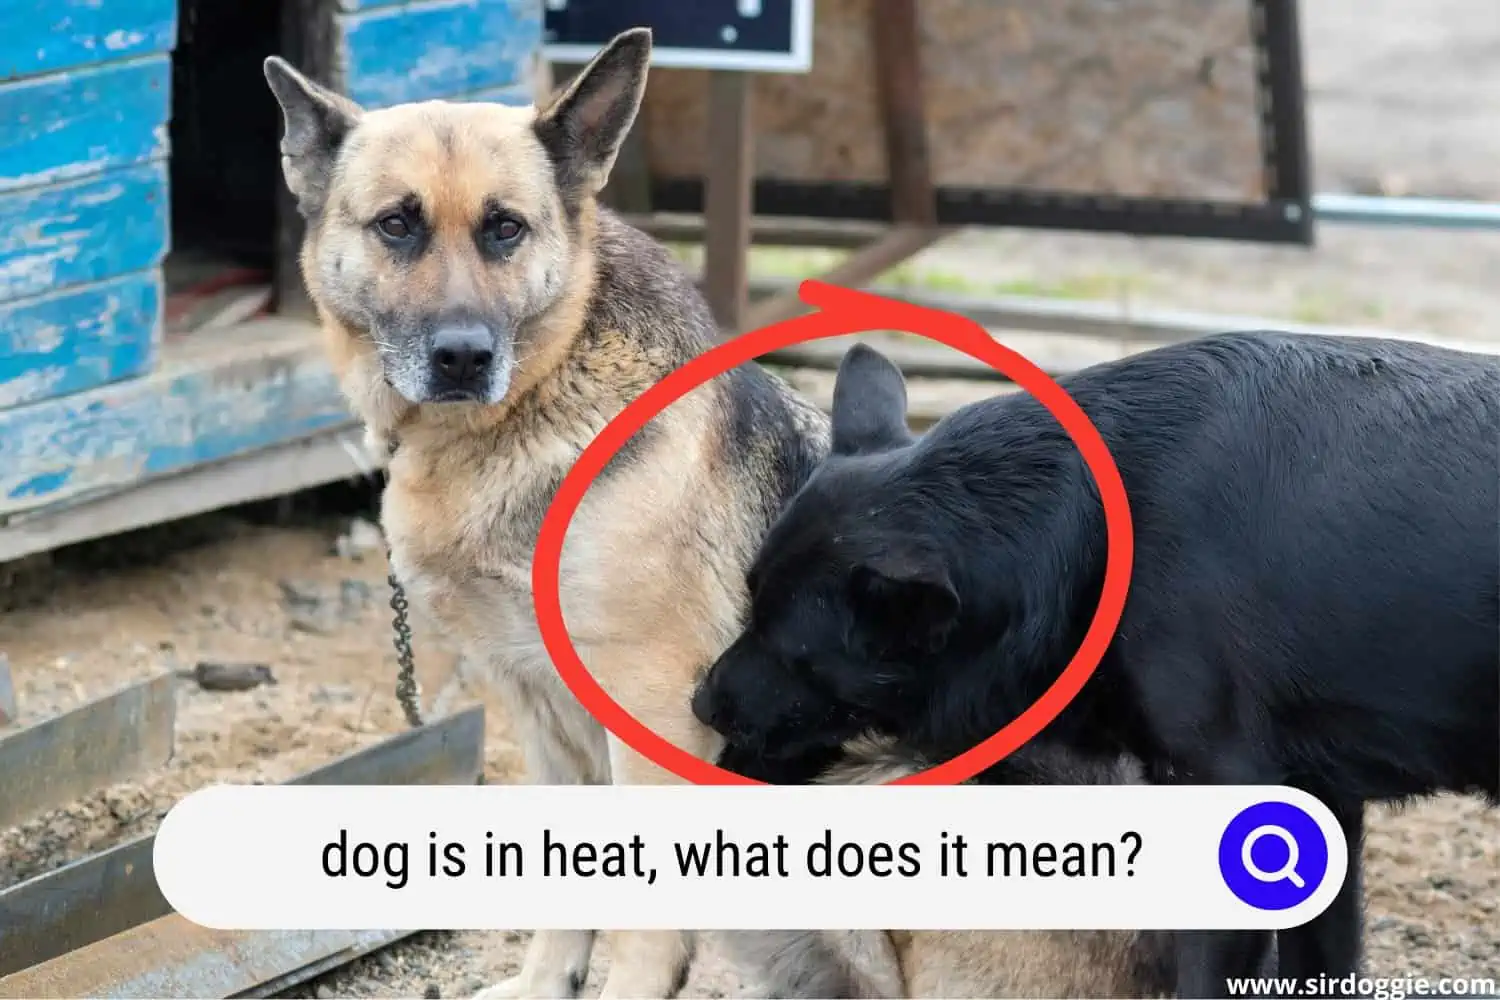 A male dog smelling the female dog in heat